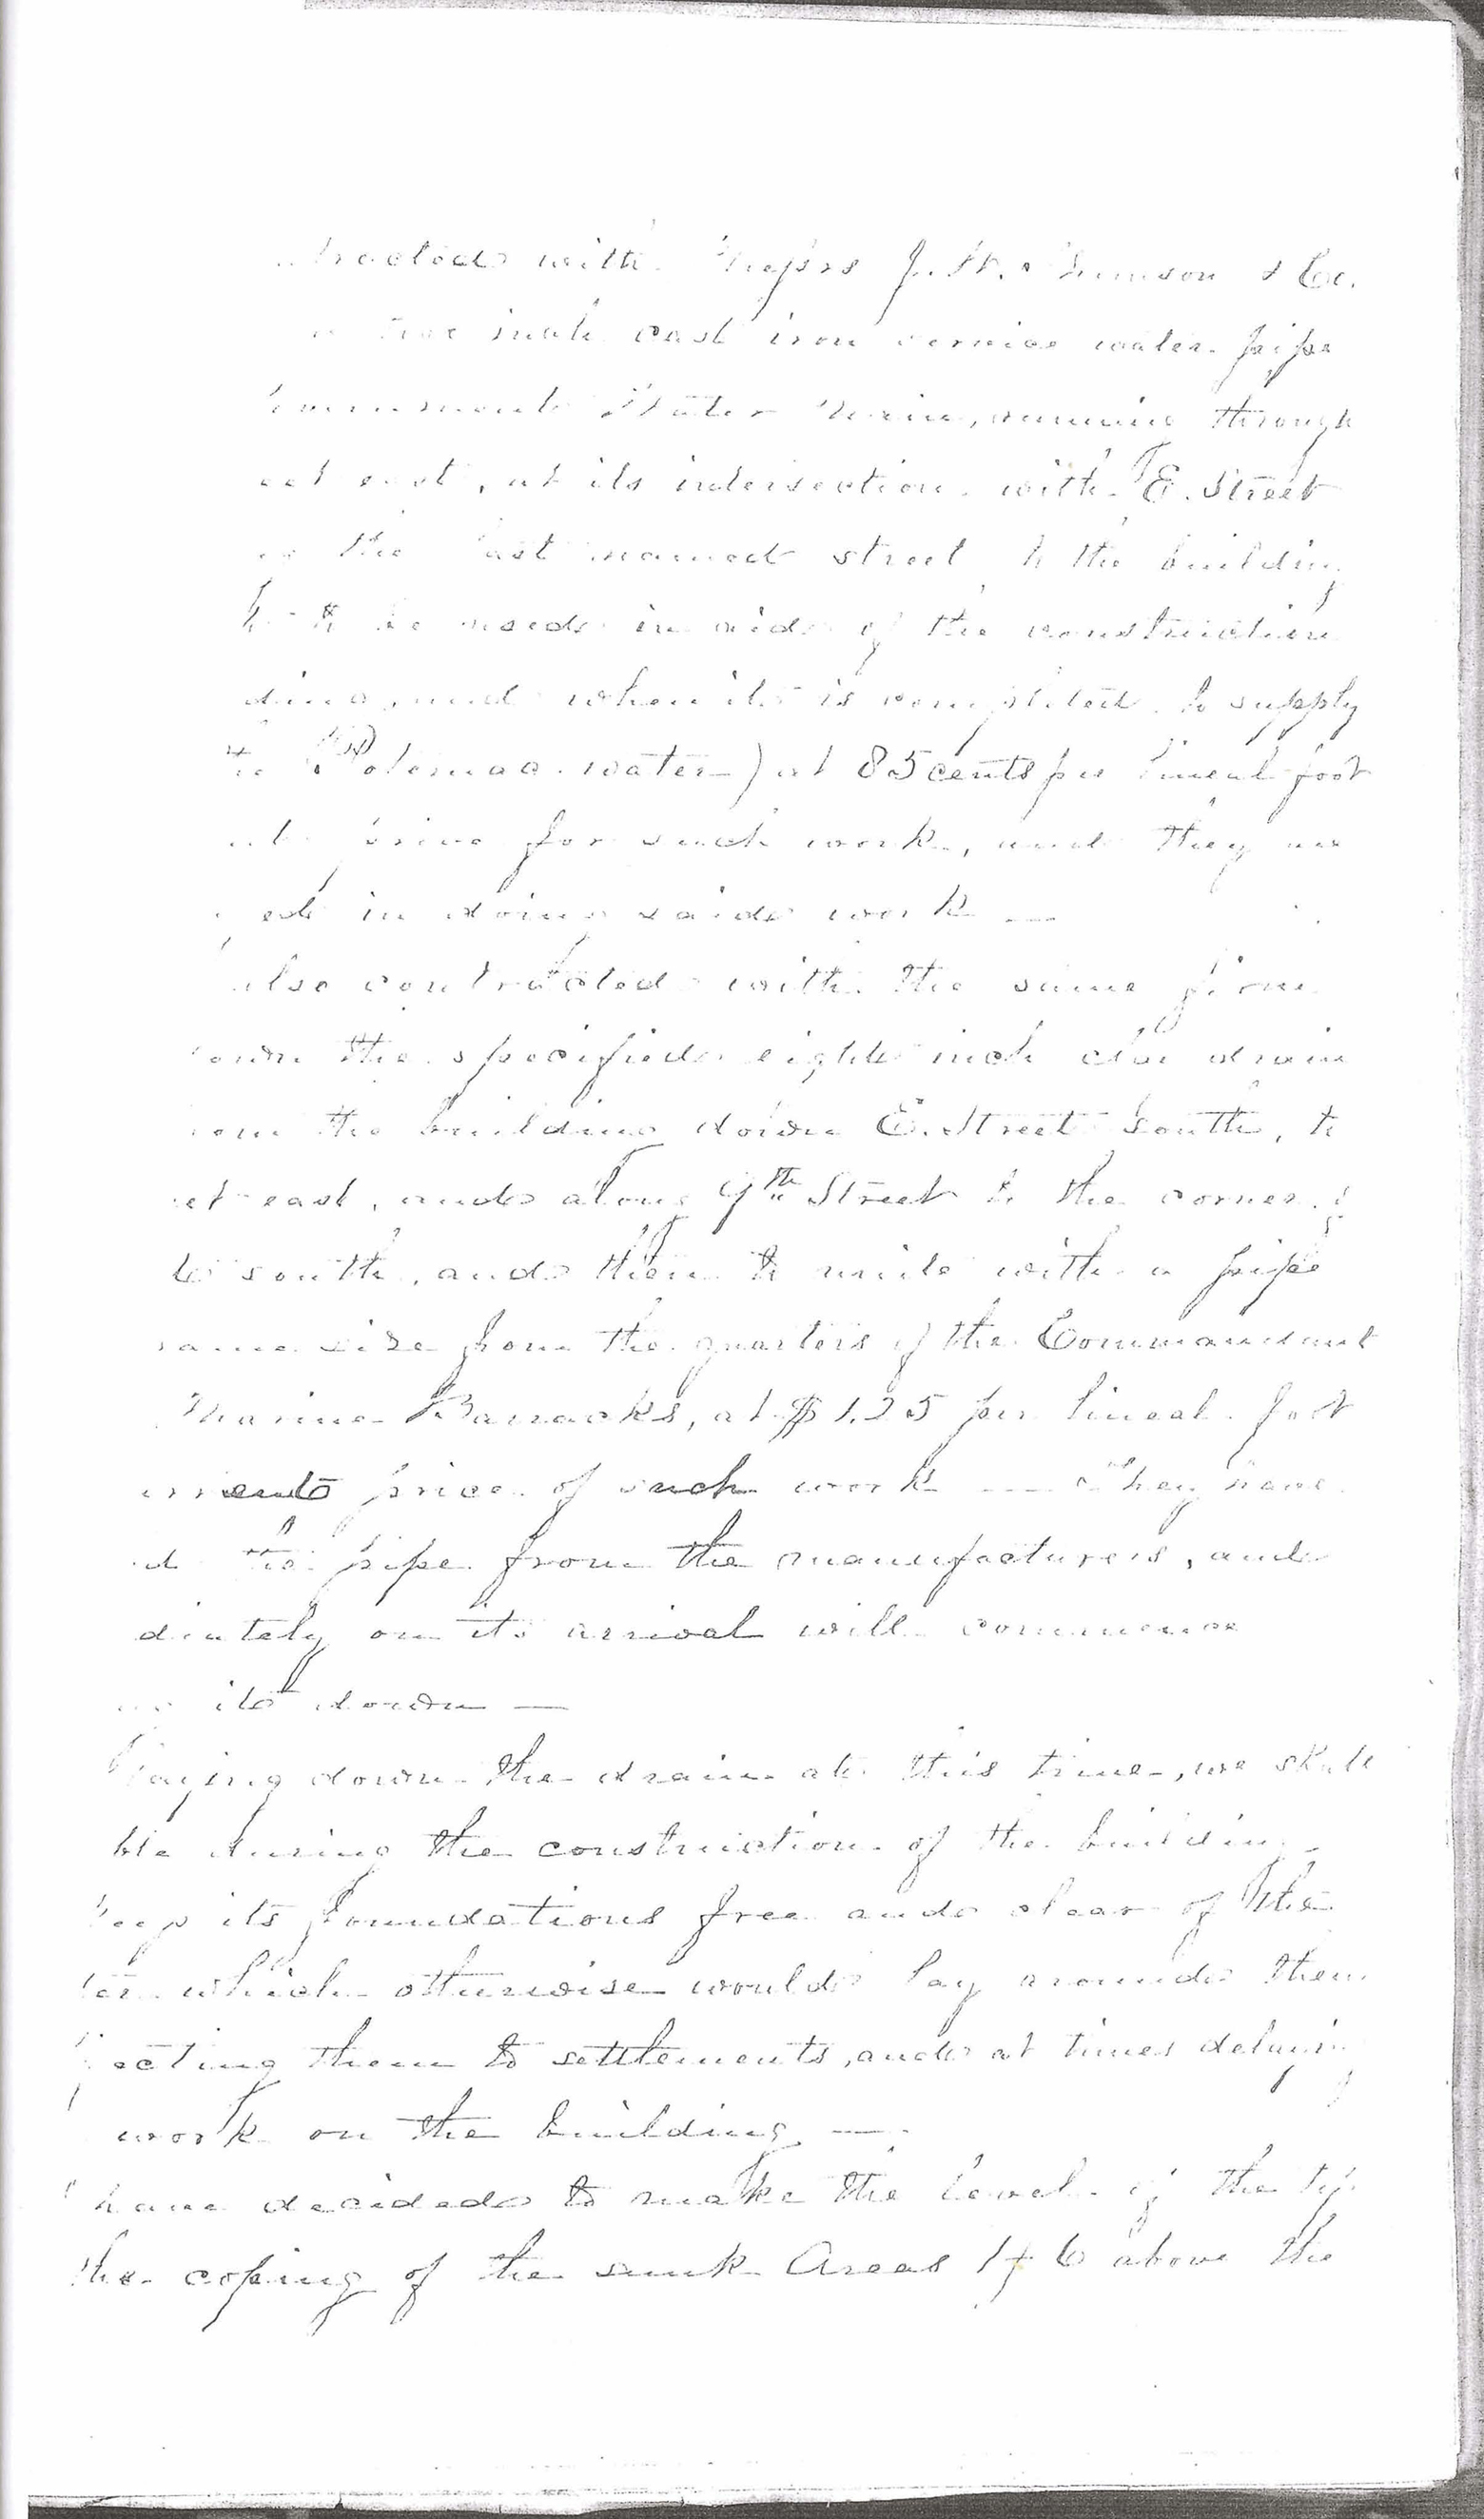 Monthly Report of the Superintendent of Construction, November 1, 1864, Page 2 of 3